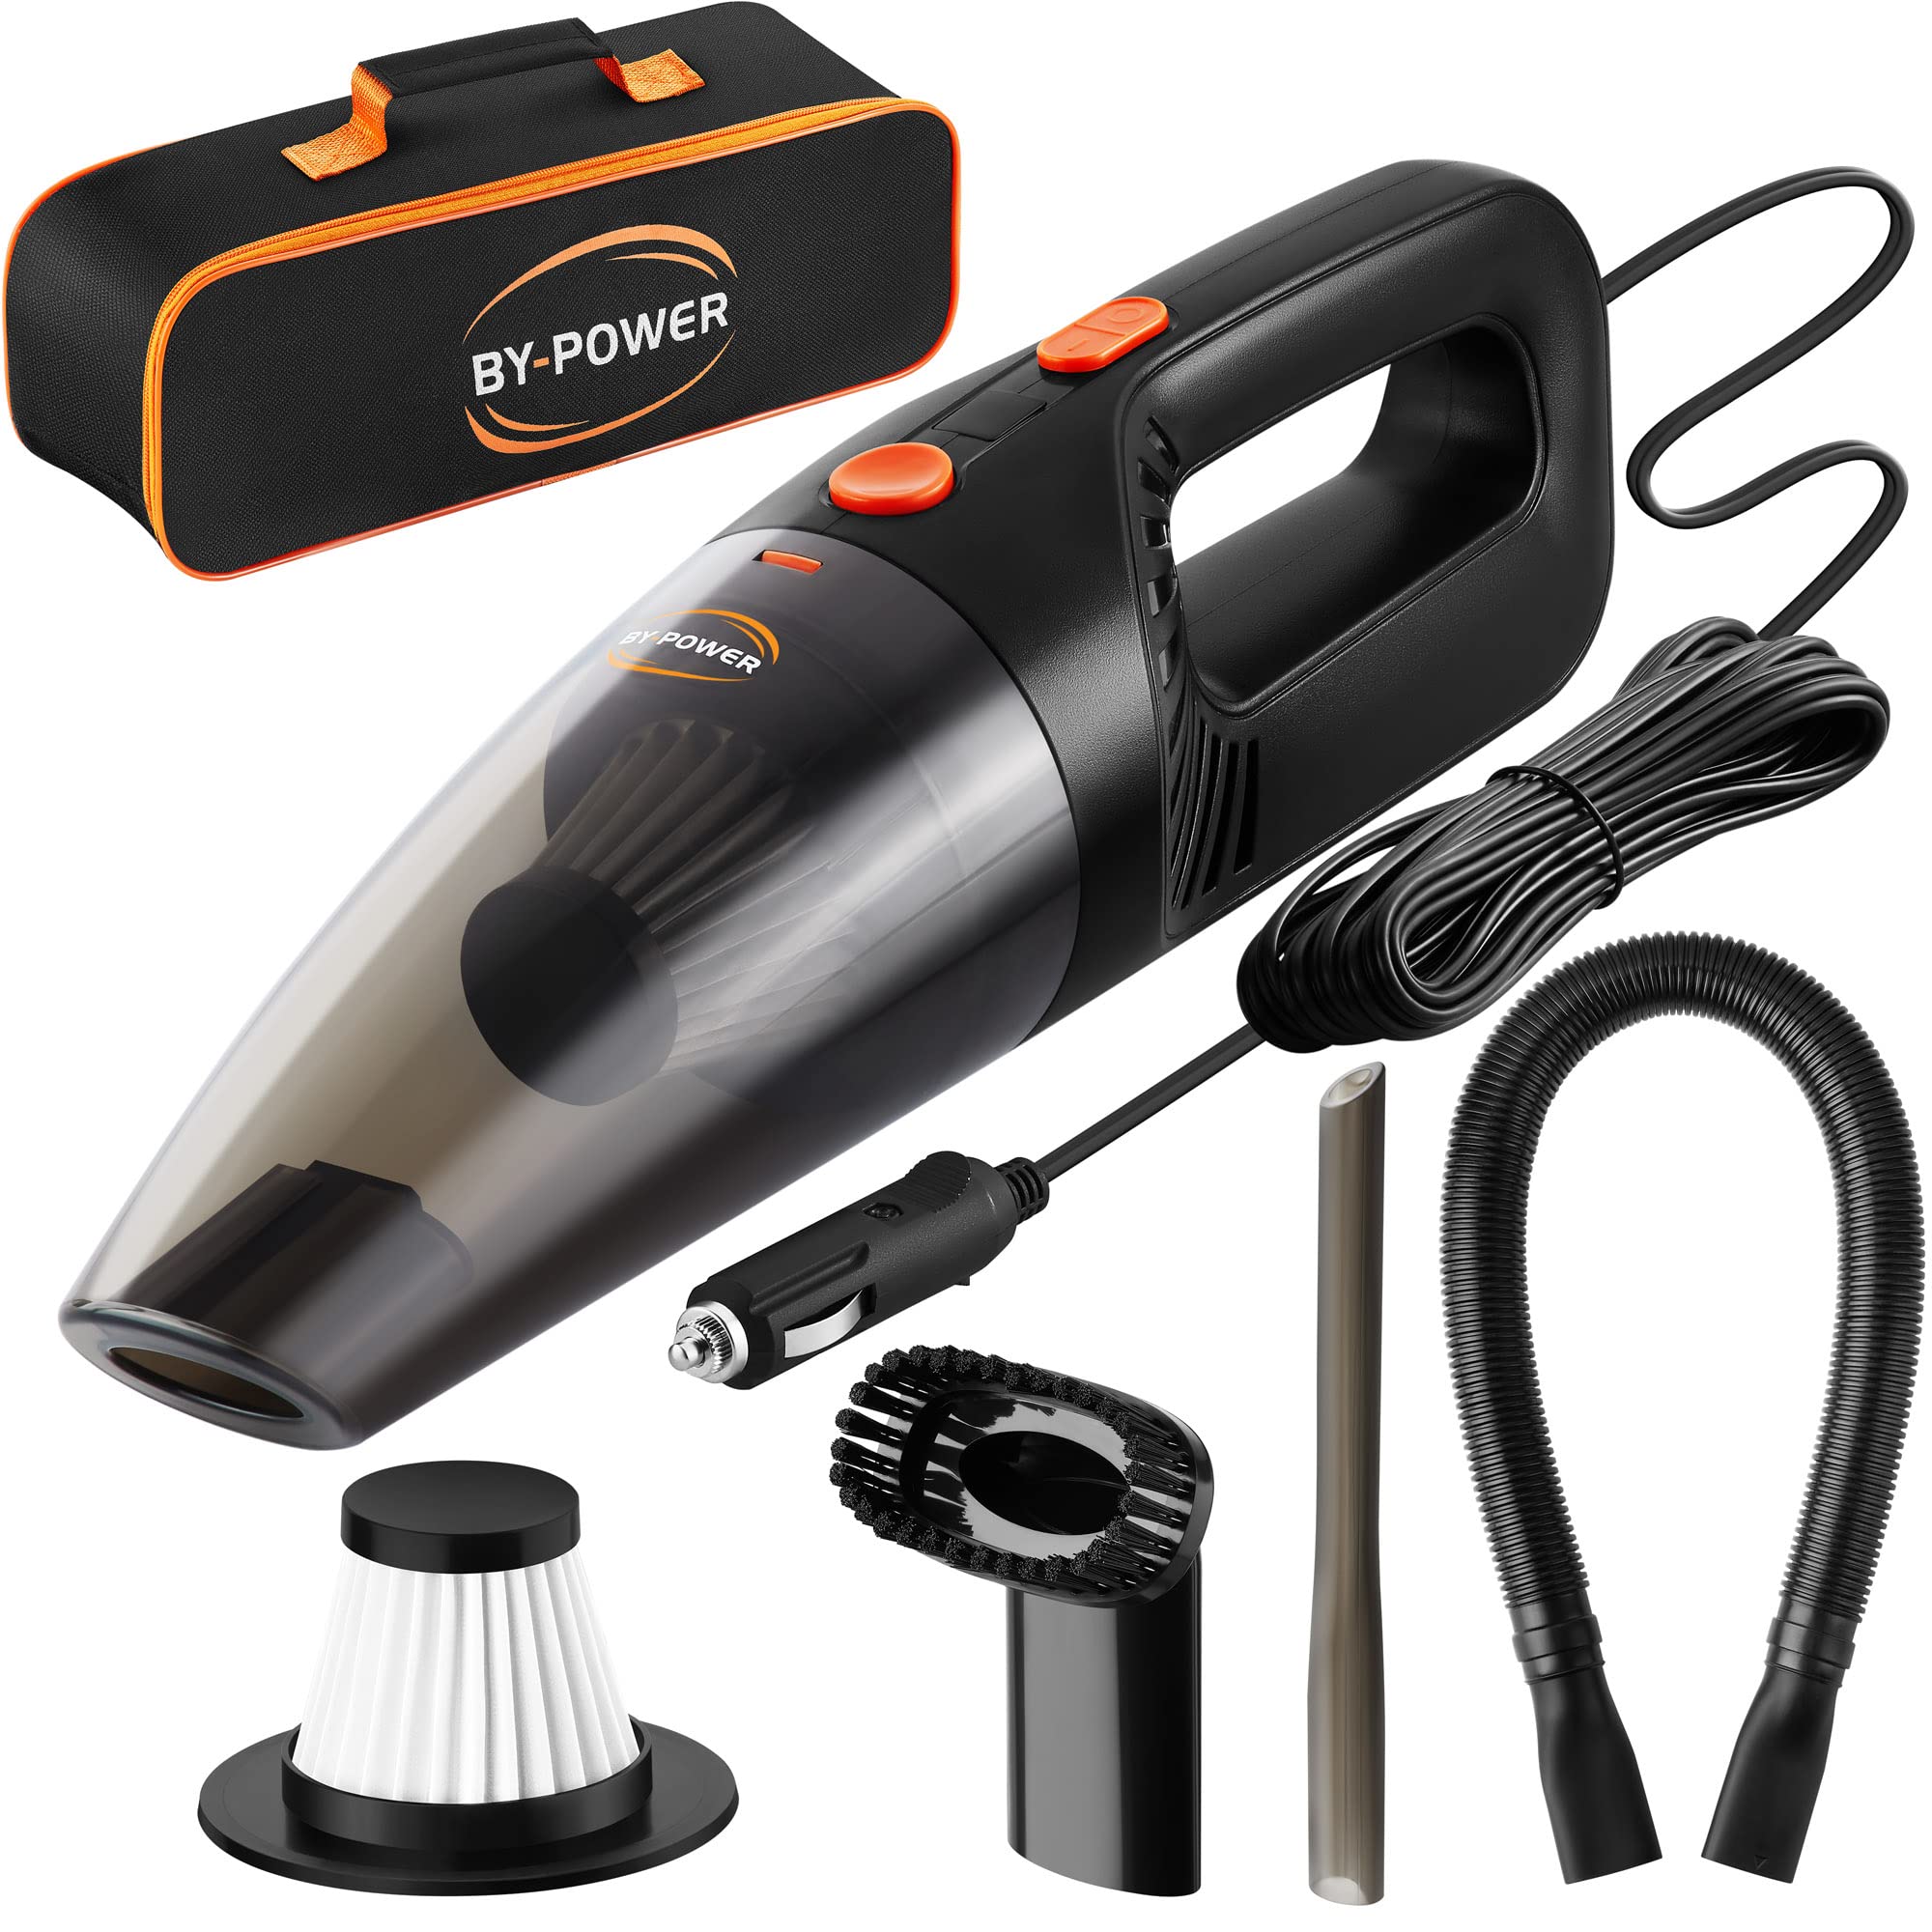 BY-POWER Car Vacuum Cleaner, Portable High Power Mini Handheld Vacuum Cleaner for Wet and Dry Cleaning, 12V DC, 16 Ft Cord with 